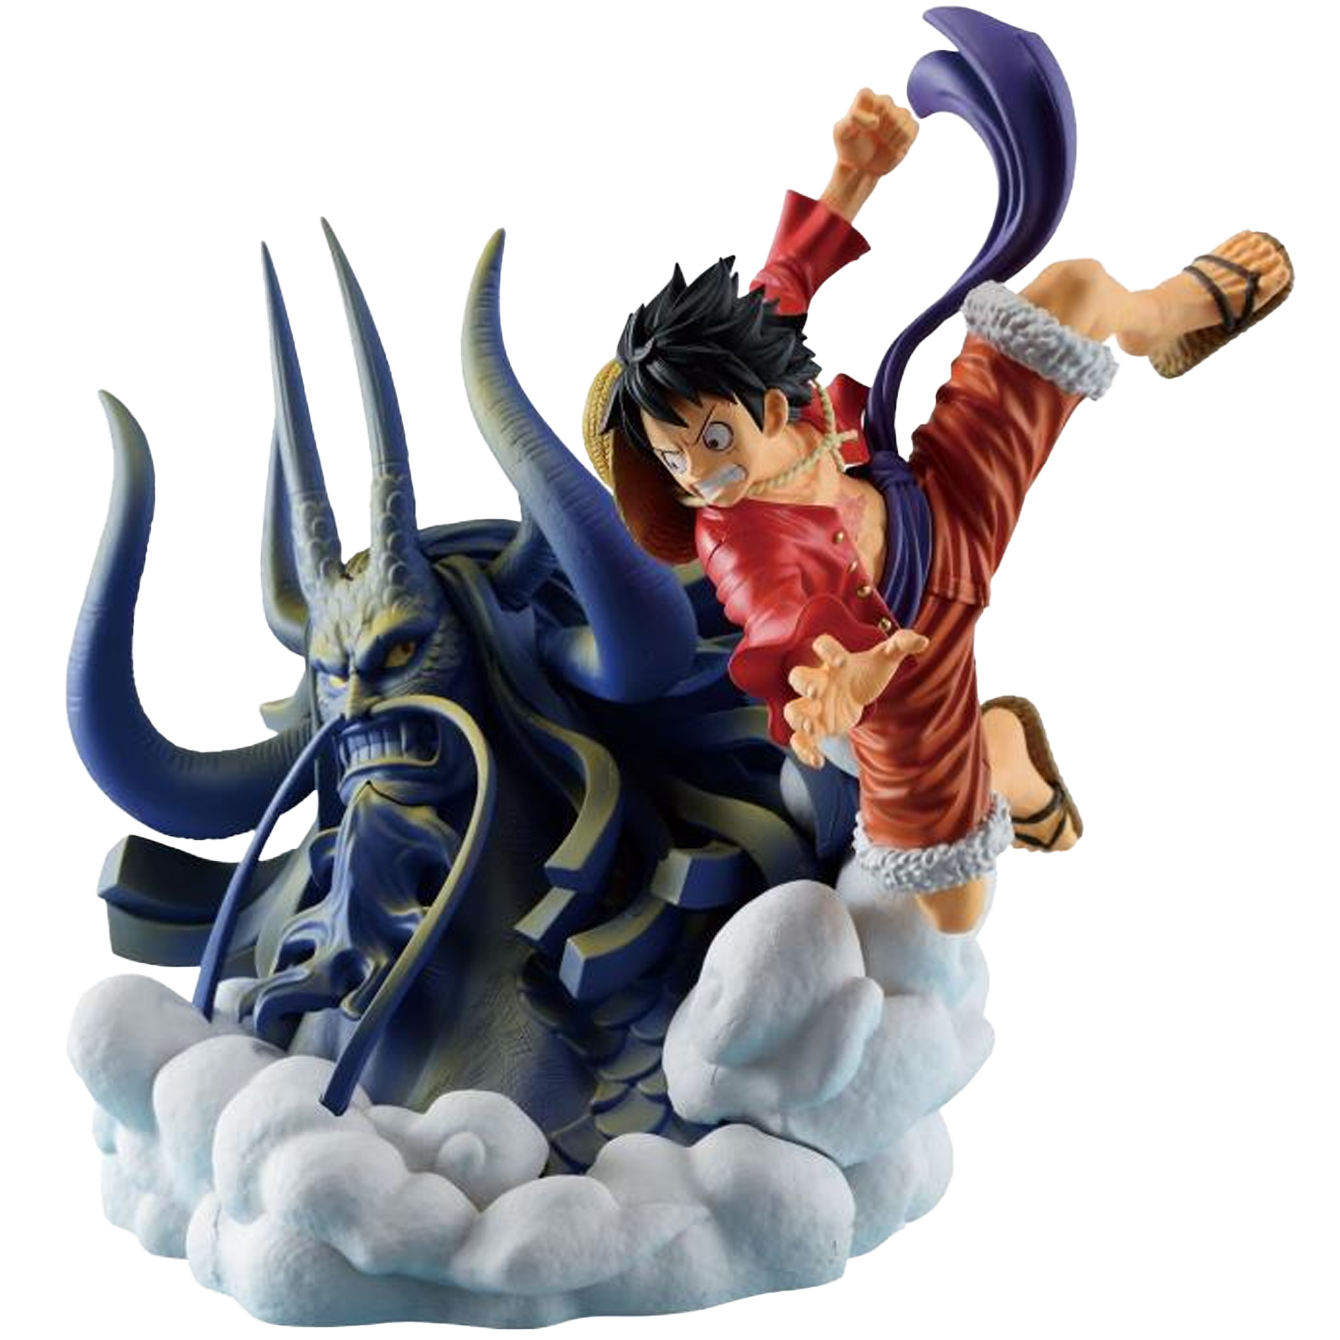 PRE-ORDER One Piece Dioramatic Monkey D. Luffy (The Anime)